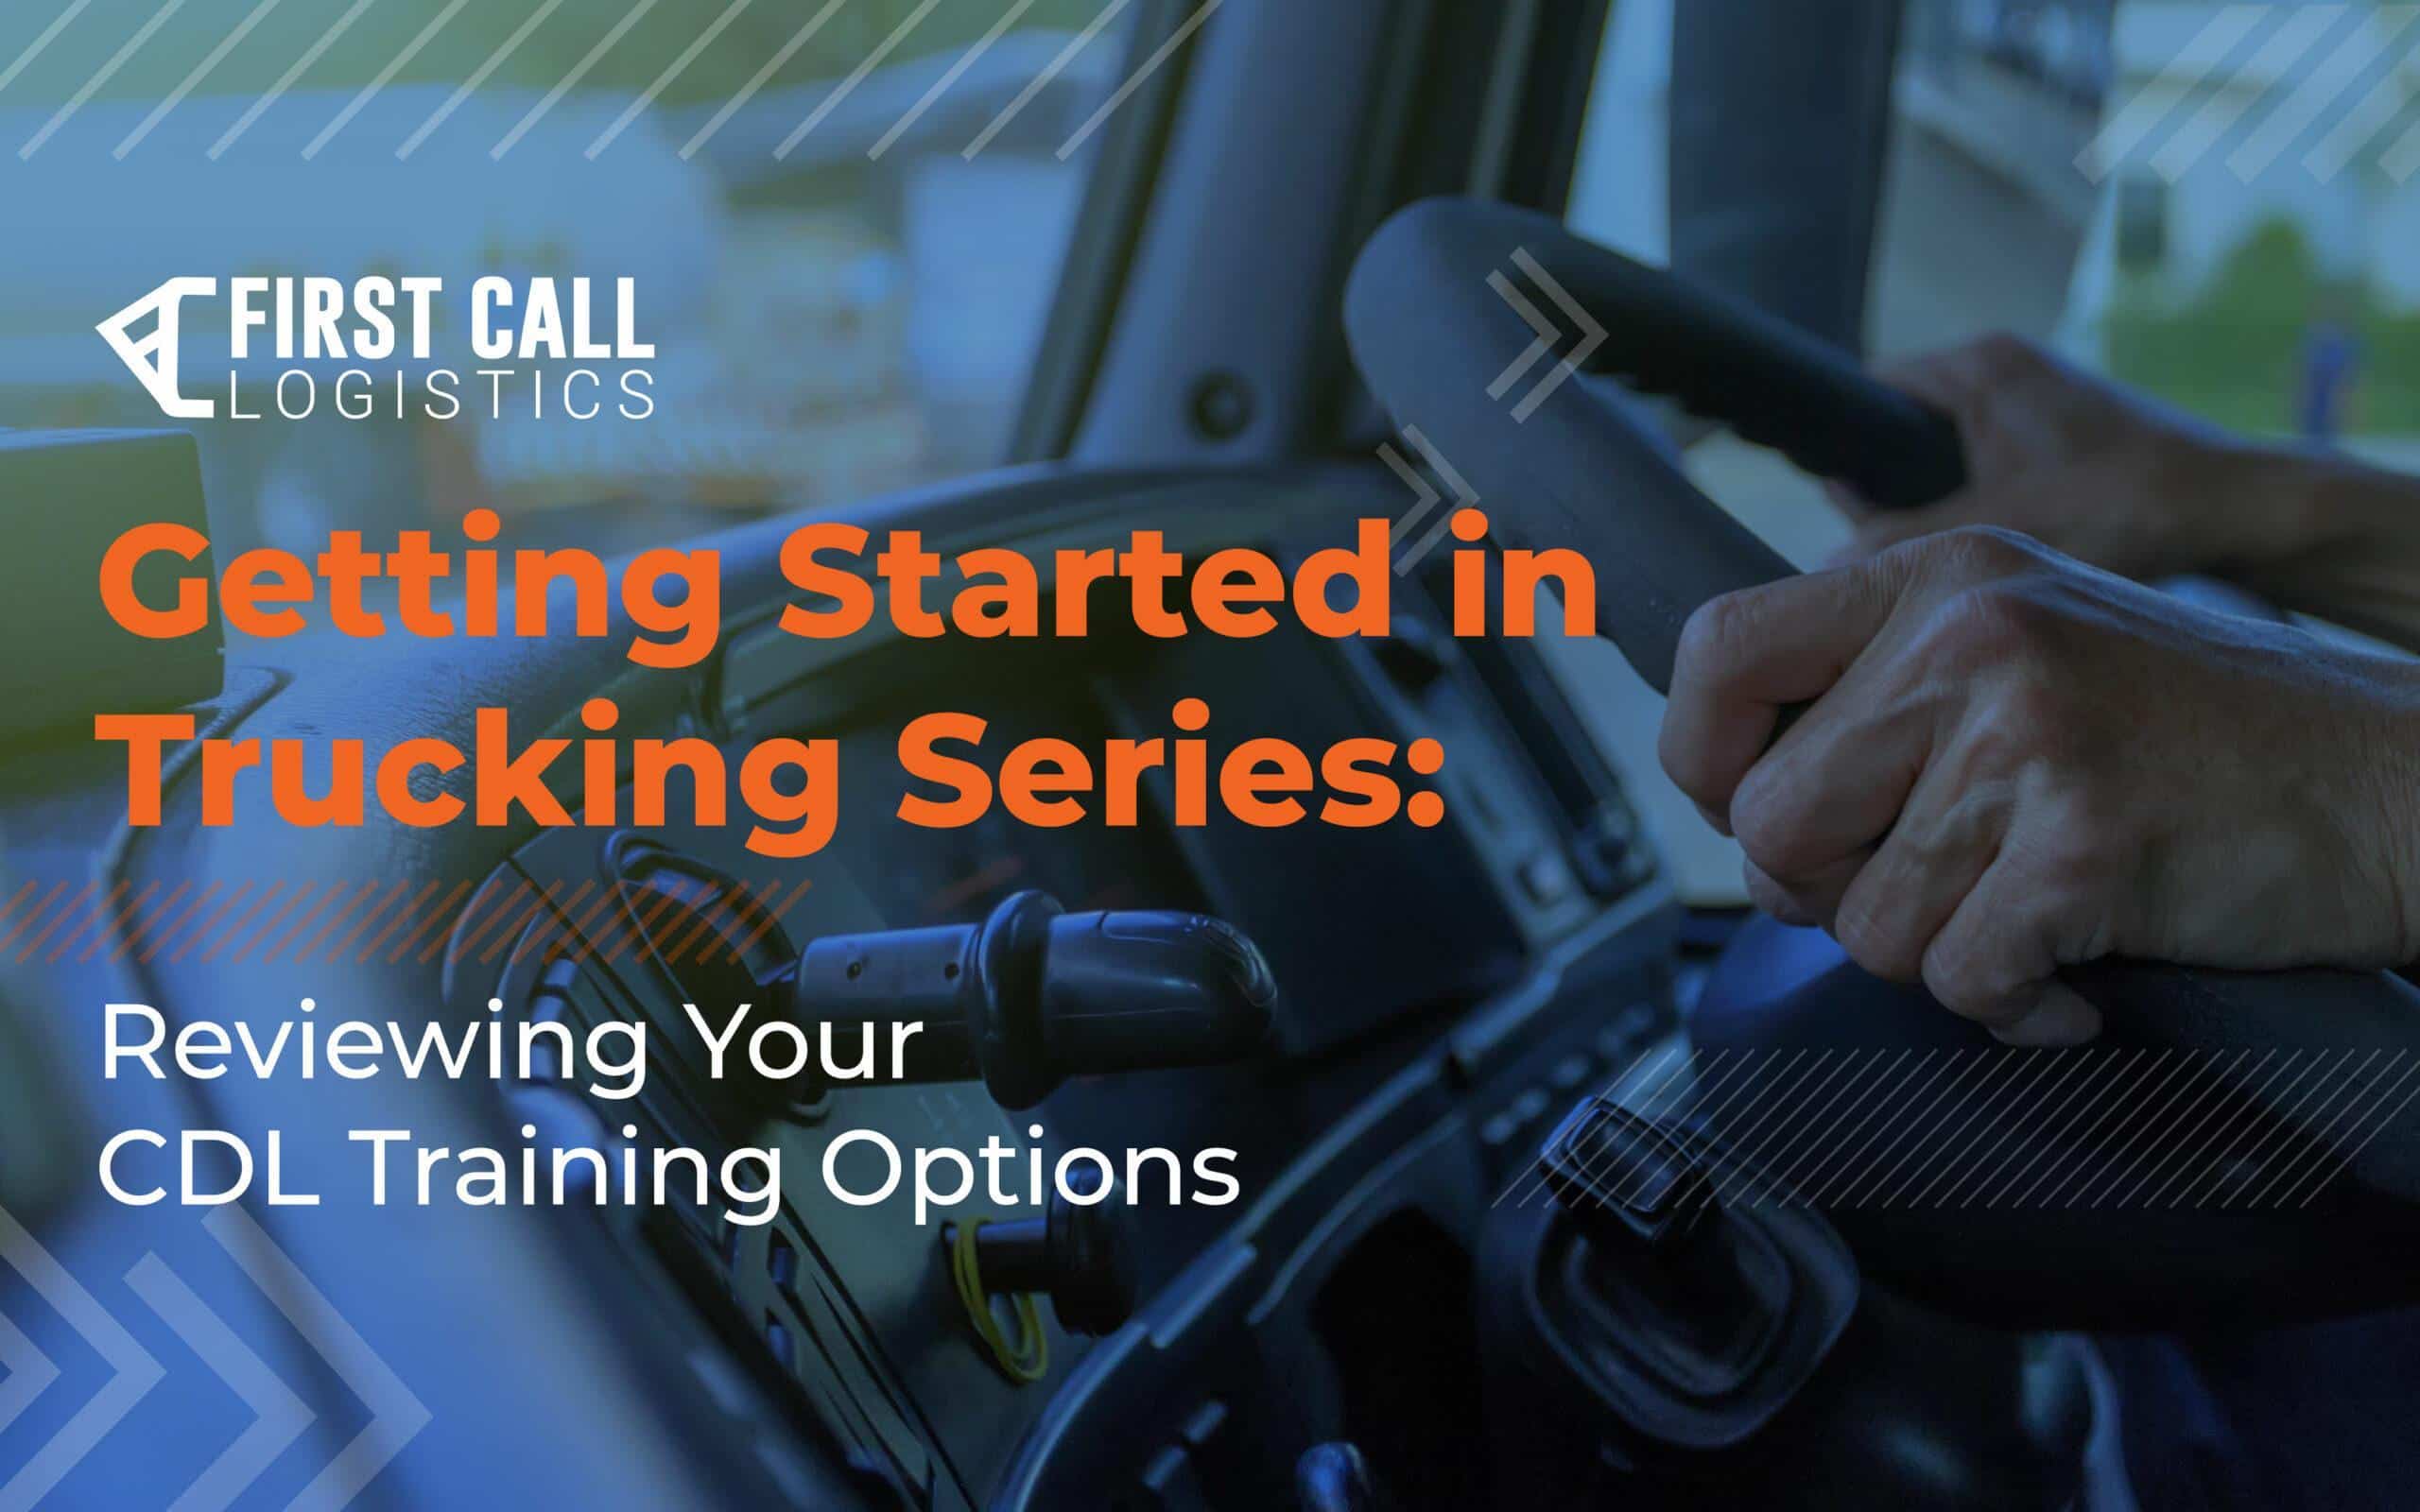 getting-started-in-trucking-series-reviewing-your-training-options-blog-hero-image-800x500px